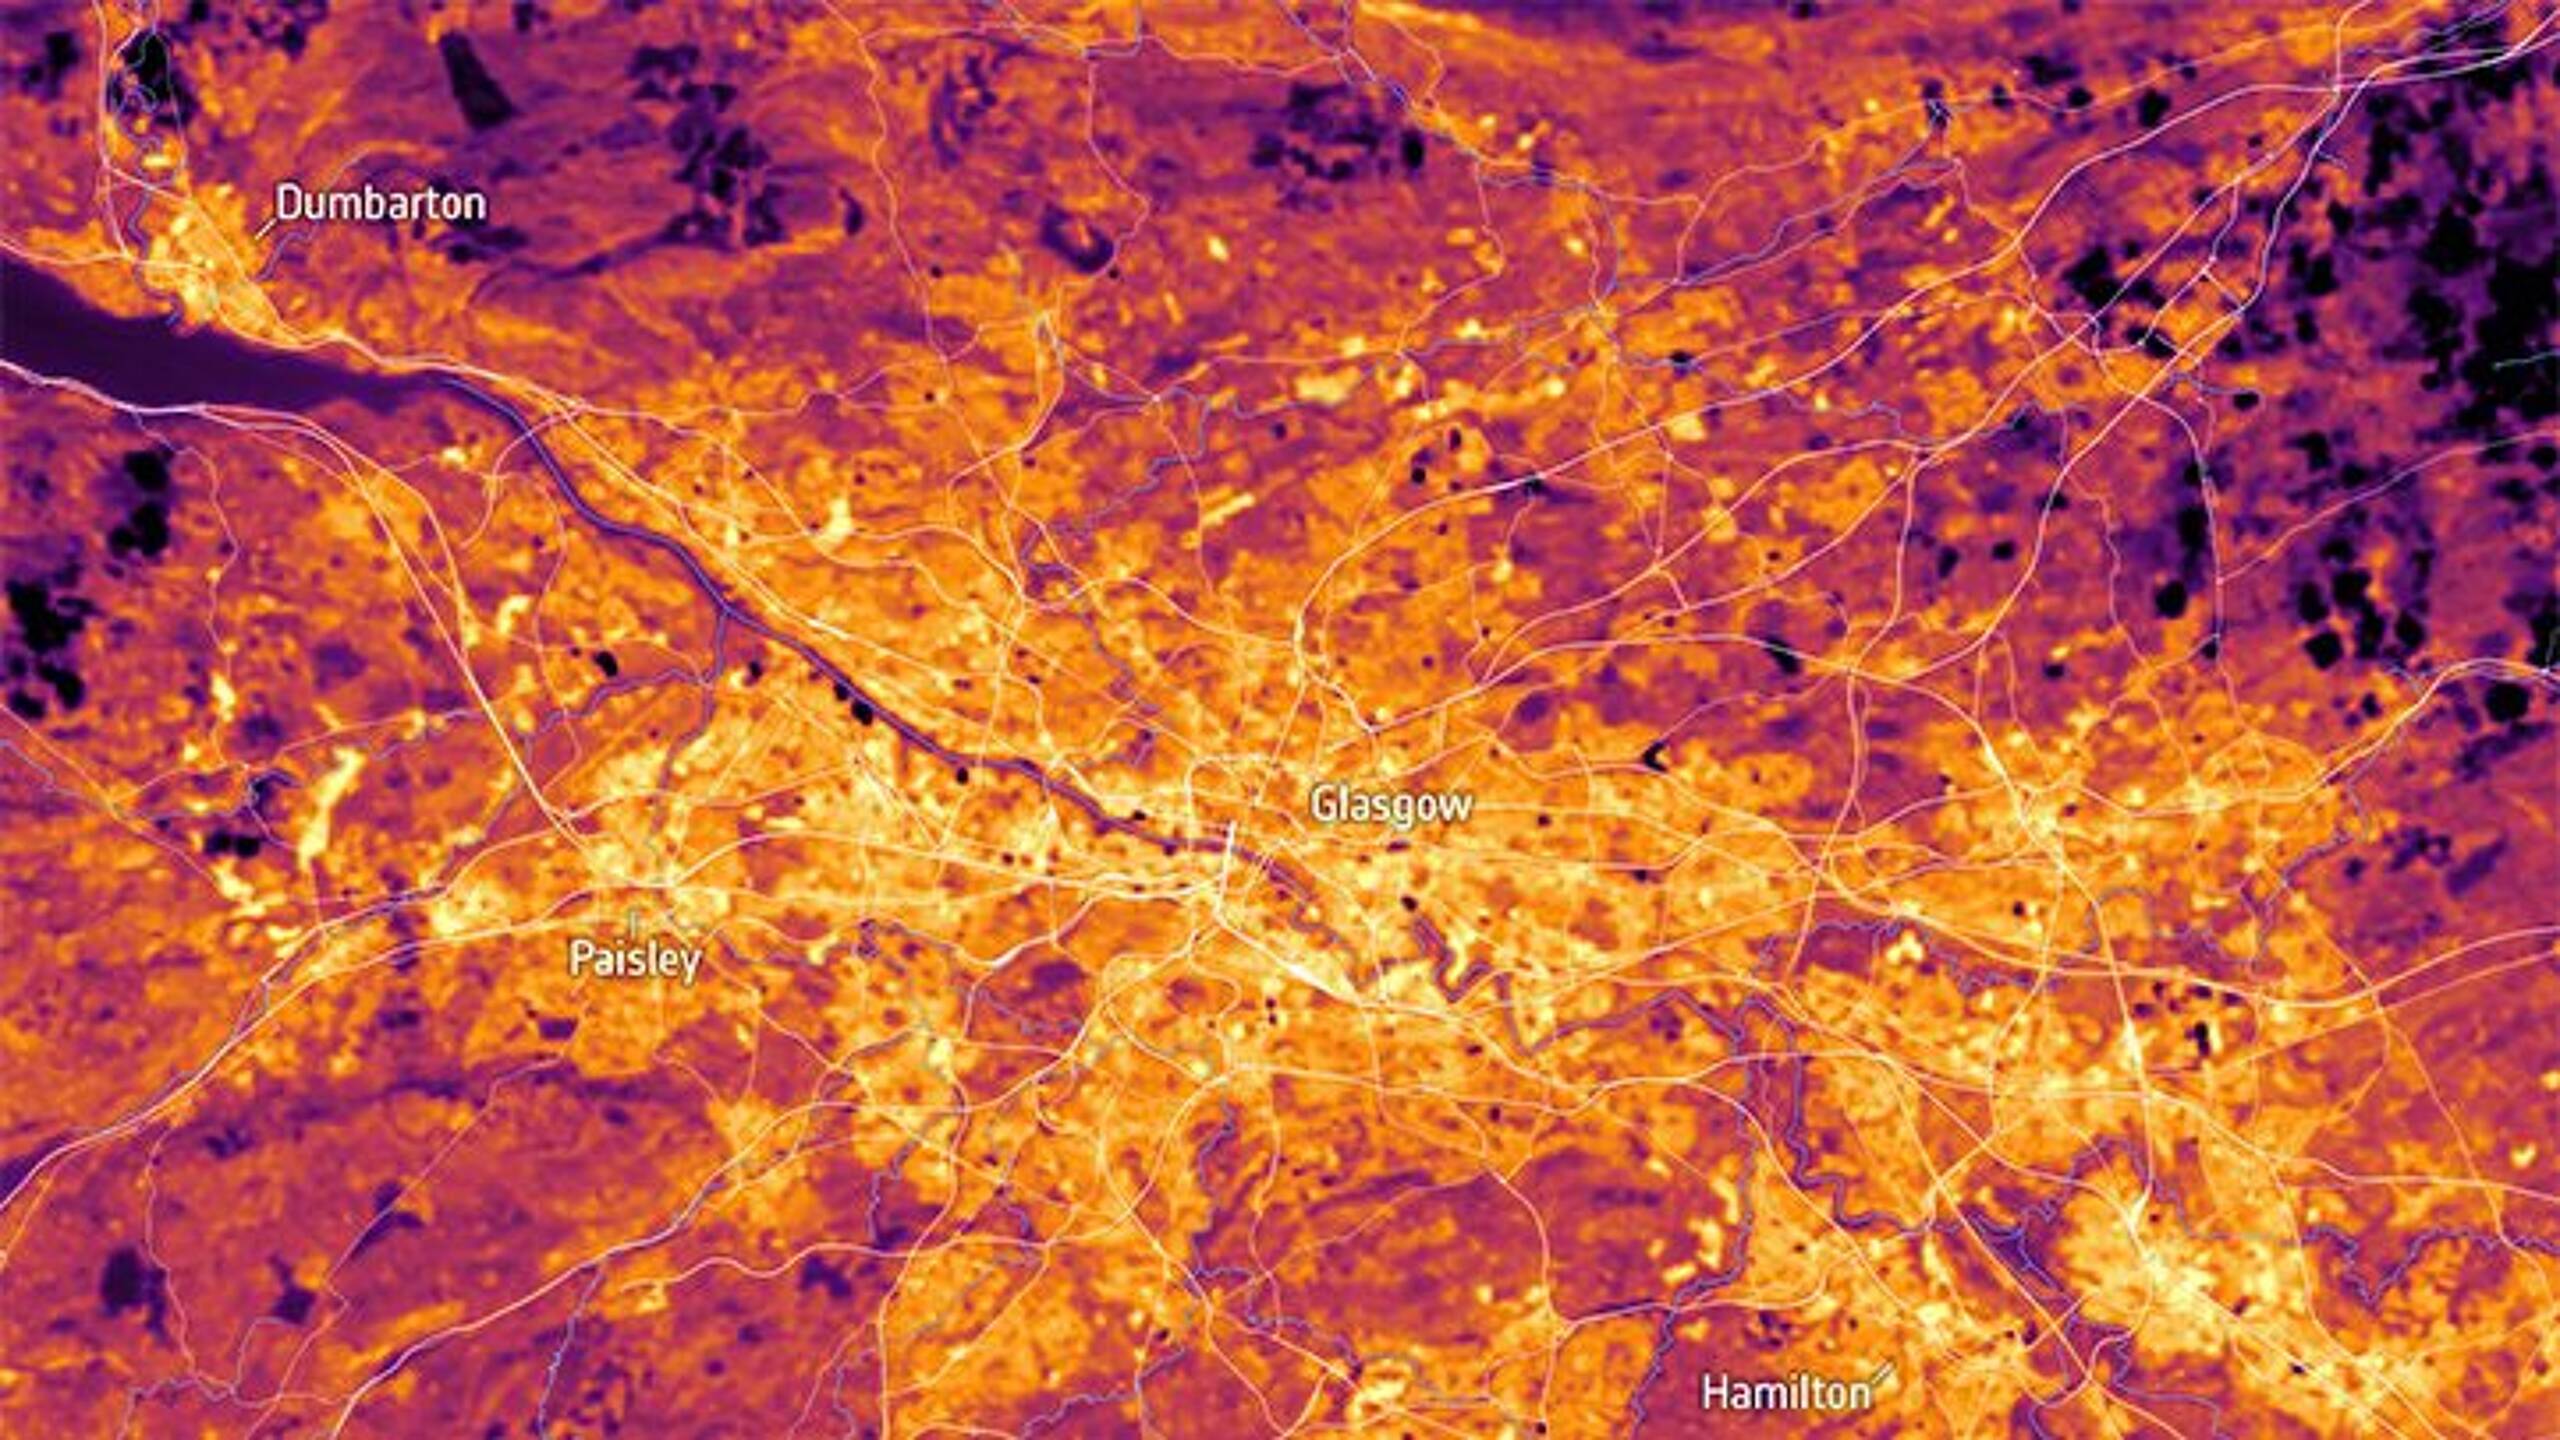 How can geospatial data help tackle climate change?